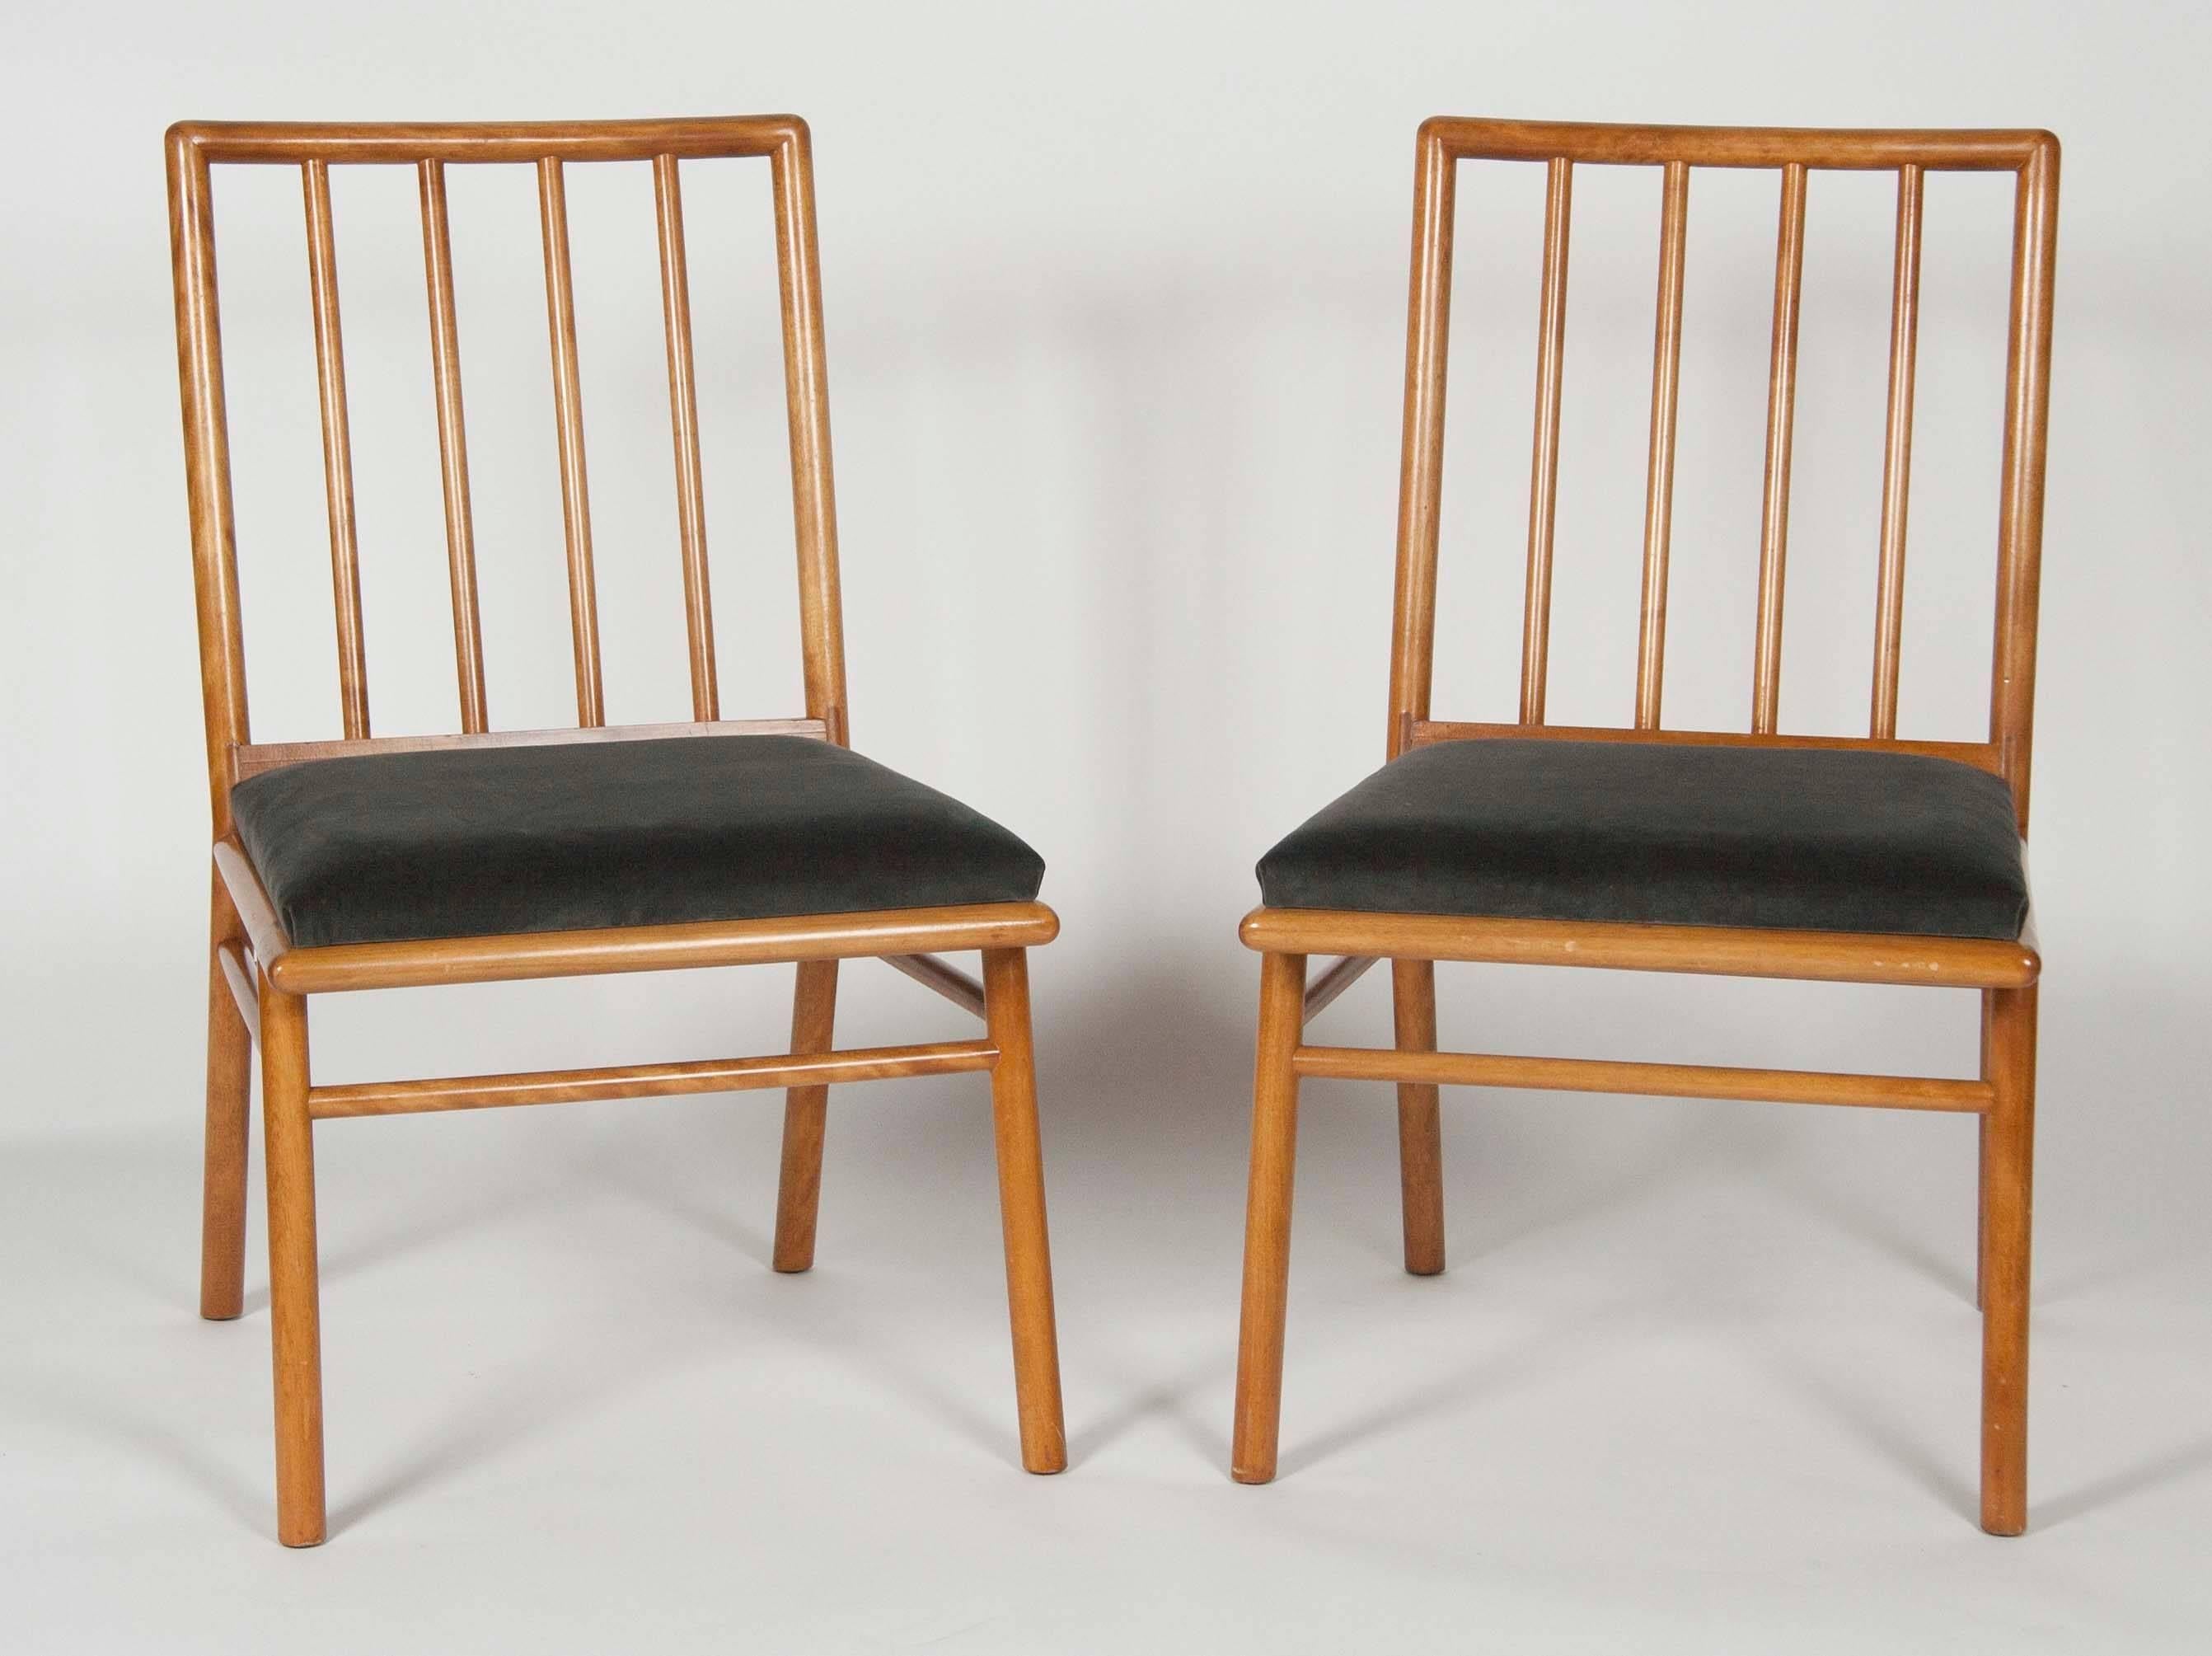 A set of four Mid-Century side chairs by T.H. Robsjohn-Gibbings.